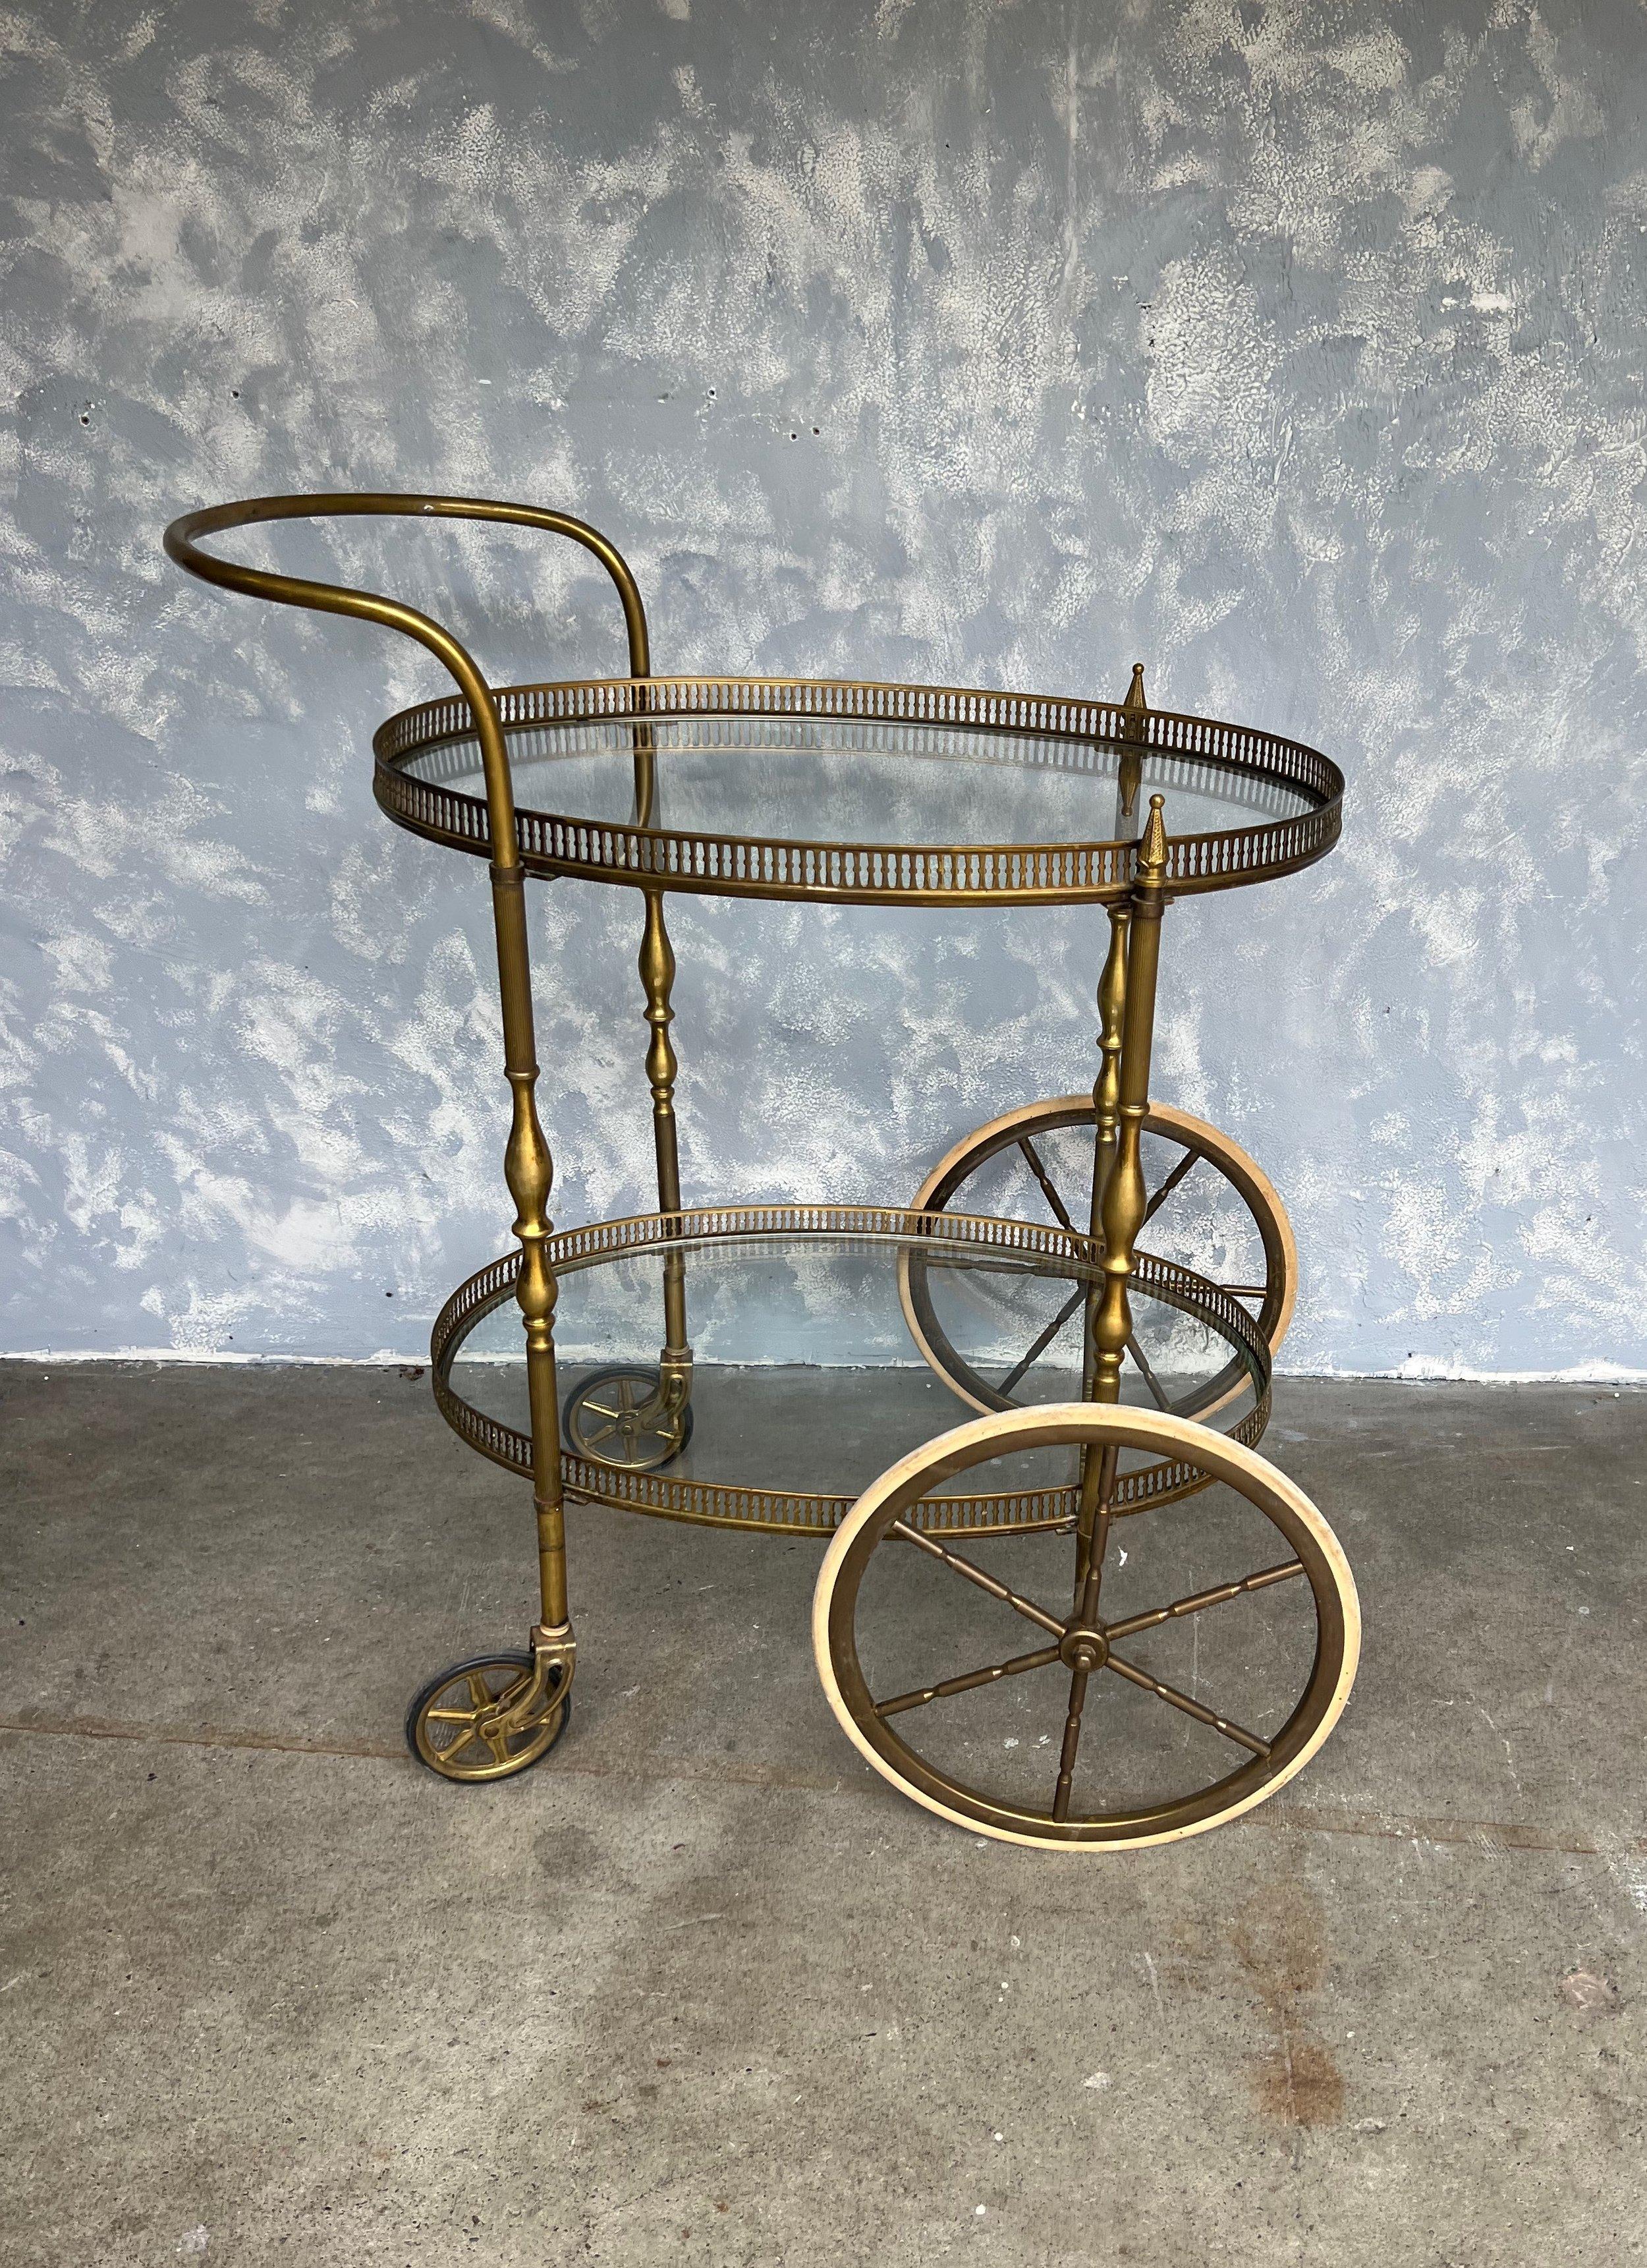 A handsome French bar cart from the 1940s having a brass frame and 2 oval shaped glass shelves enclosed in a brass gallery. The bar cart is mounted on casters making it easy to move around. Very good vintage condition.

Ref #: